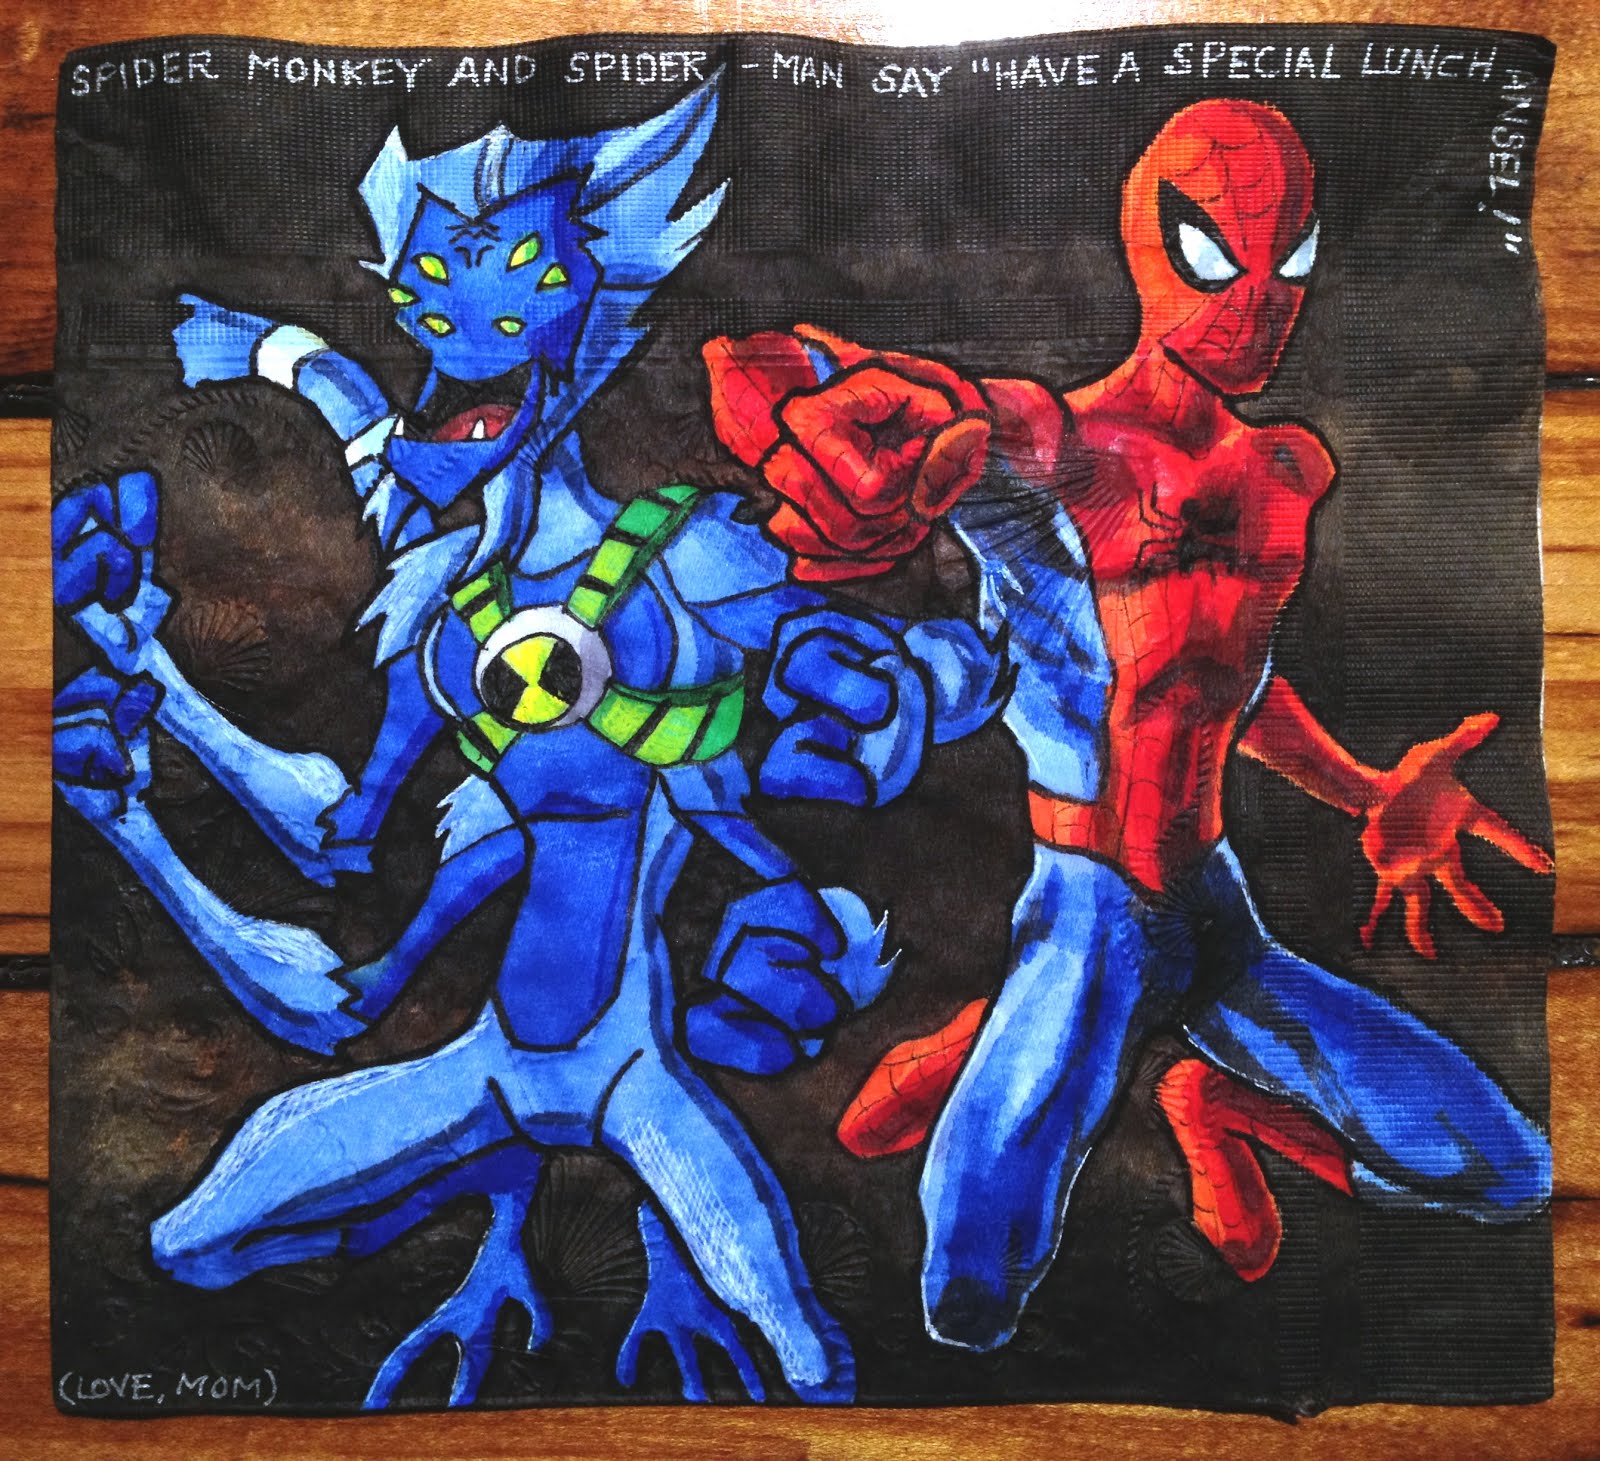 superhero - Srider Monkey" And SpiderMan Say Whave A Special Lunch Ansel Lone, Mond